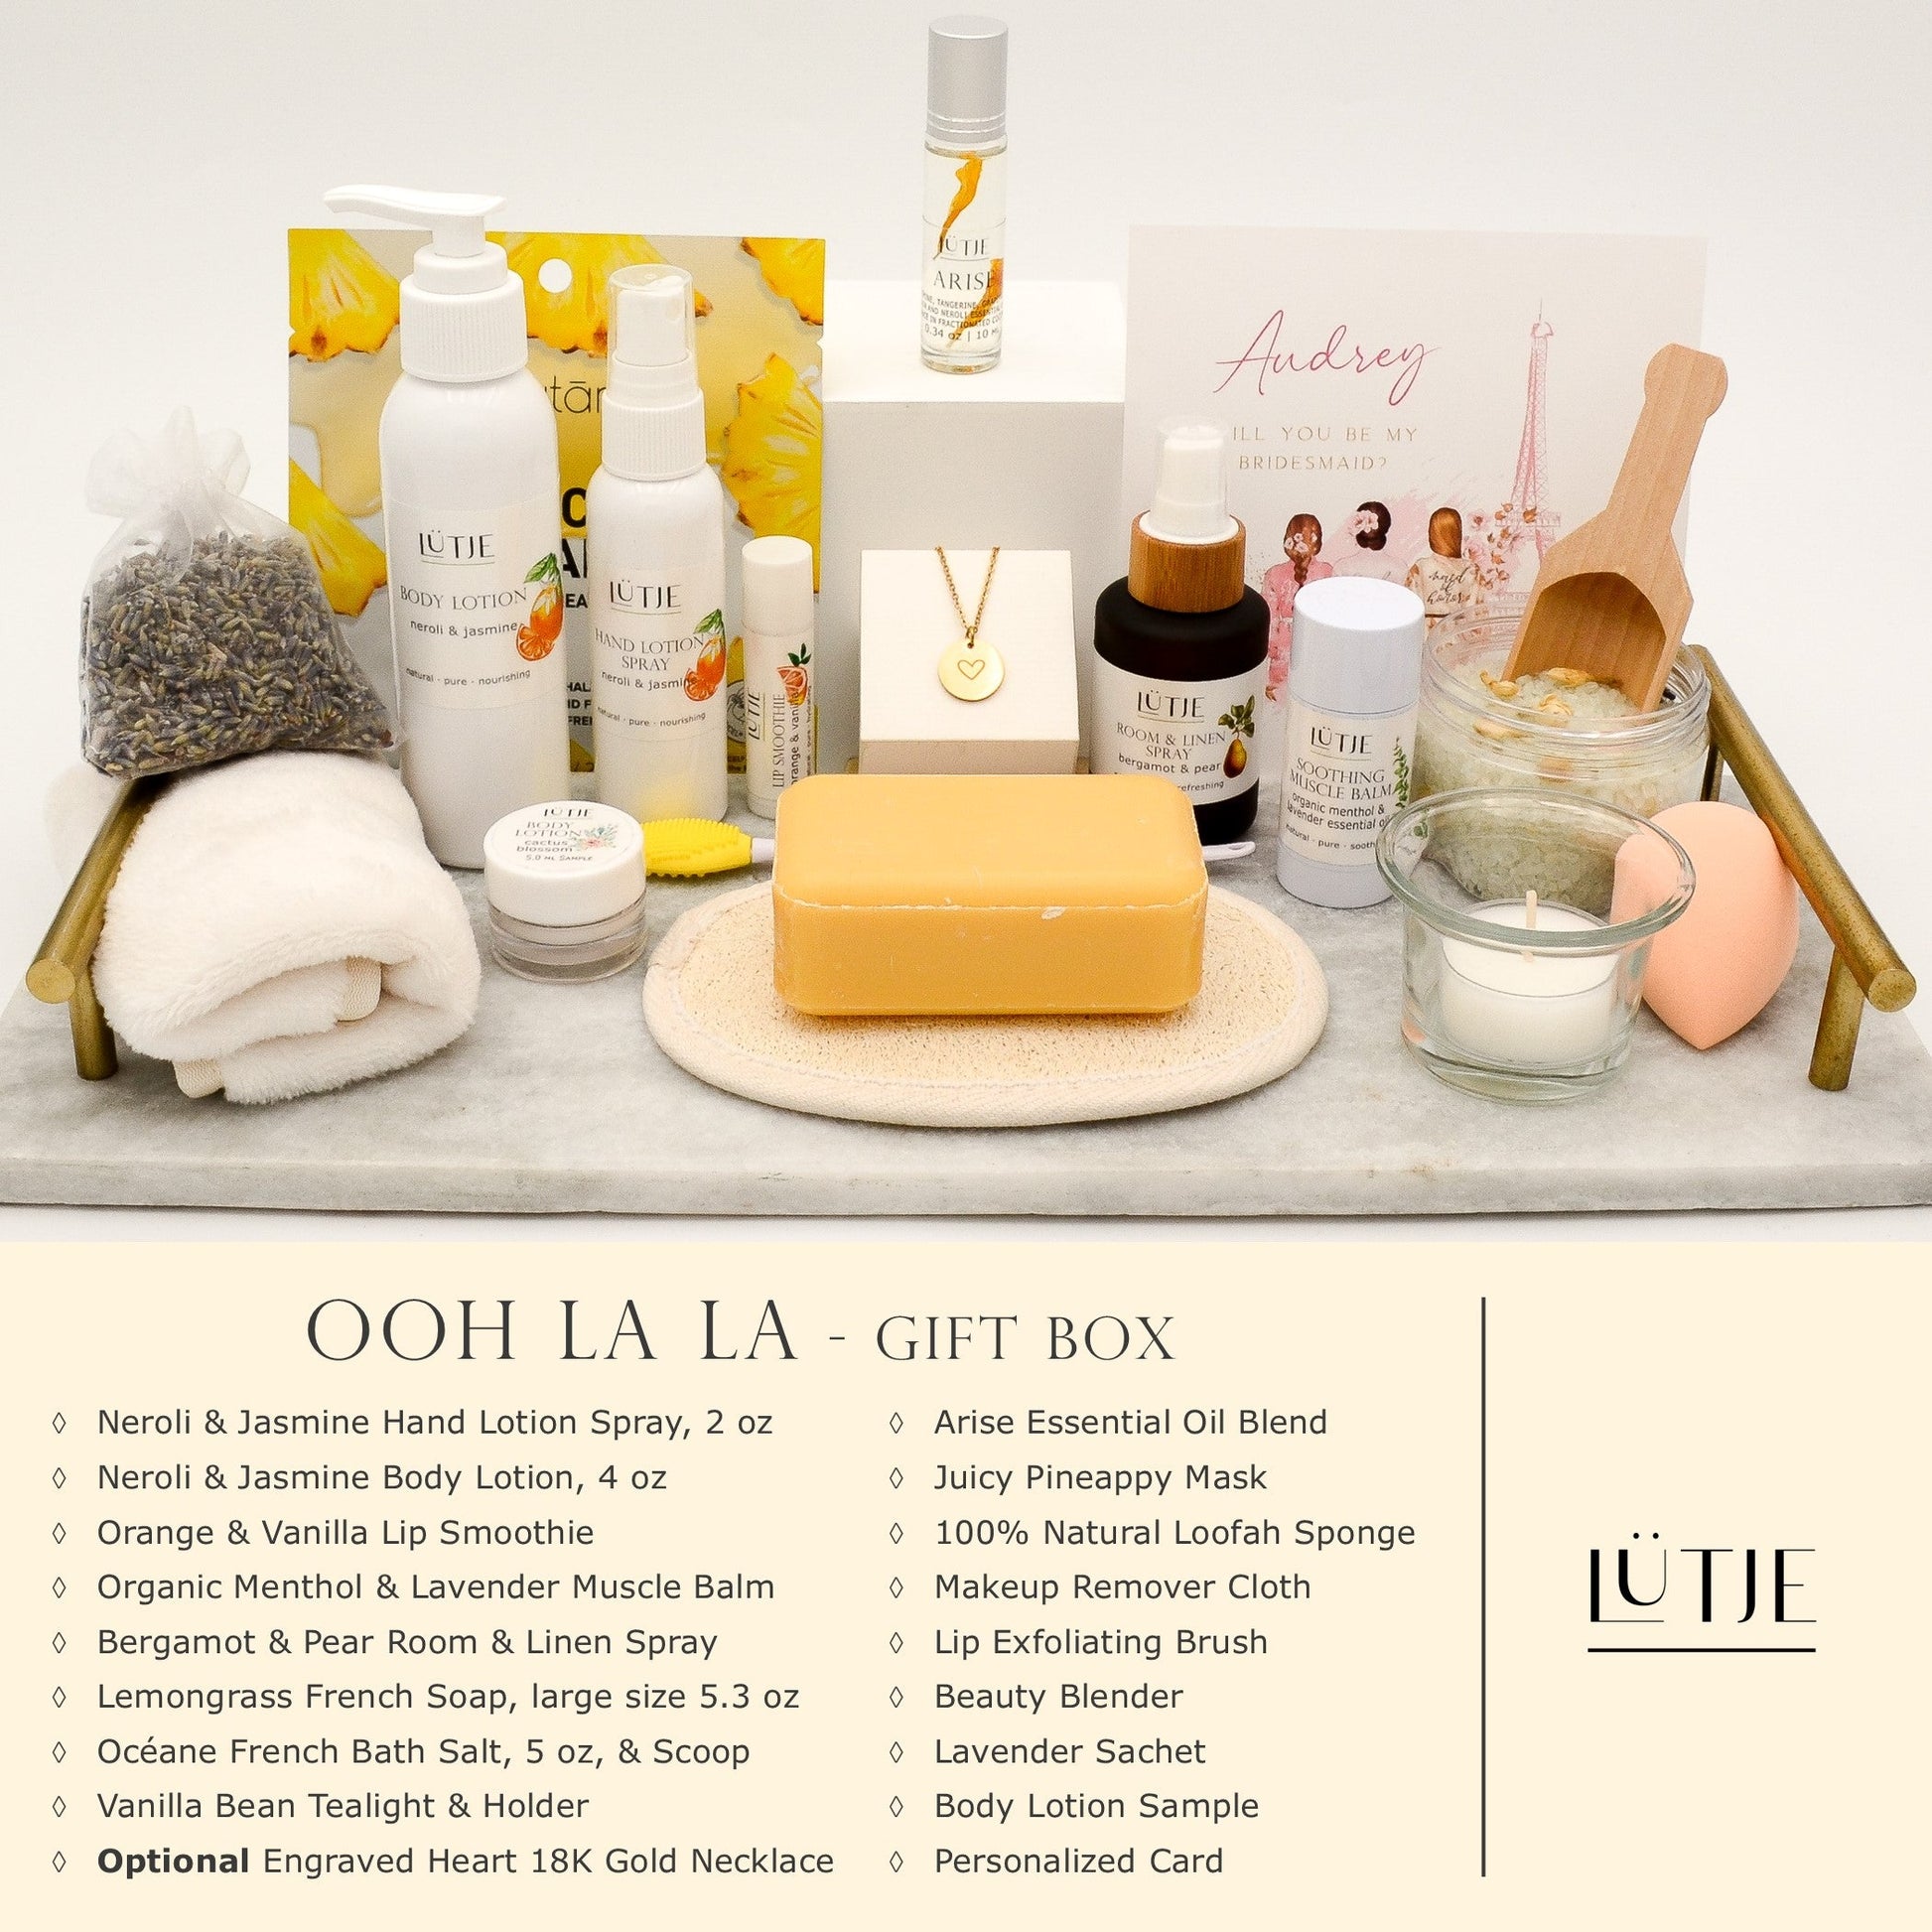 Ooh La La Gift Box for women, wife, daughter, BFF, sister, mom, or grandma, includes Neroli & Jasmine hand lotion spray and body lotion, essential oil, lip balm, soothing muscle balm, Bergamot & Pear room & linen spray, French soap, French bath salts, hydrating face mask, other bath, spa and self-care items, and optional 18K gold-plated necklace with engraved heart.